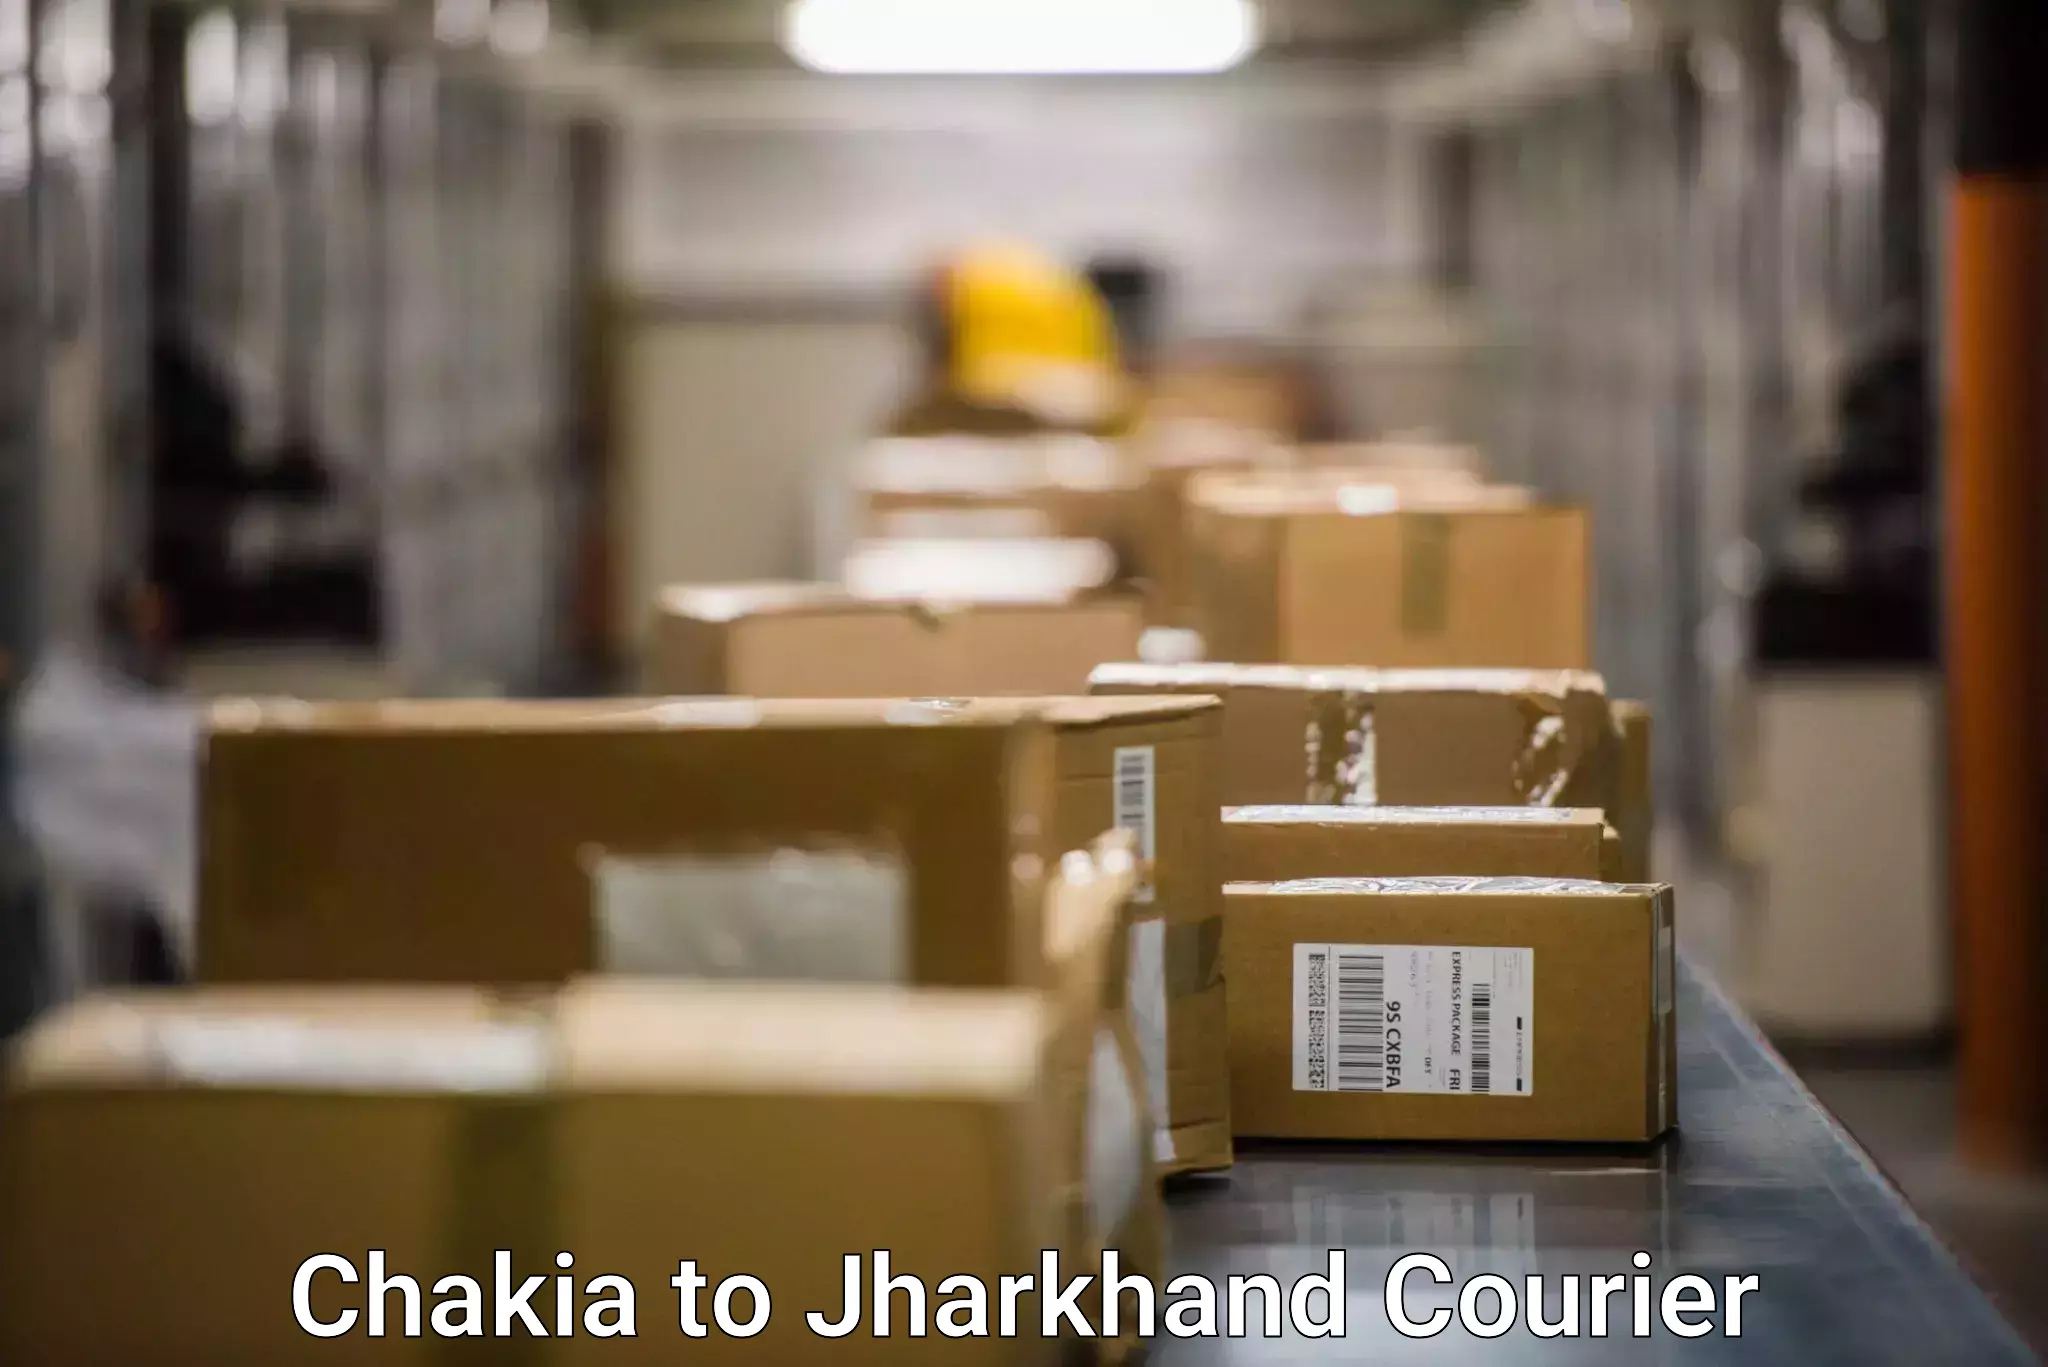 Nationwide courier service Chakia to Jamshedpur